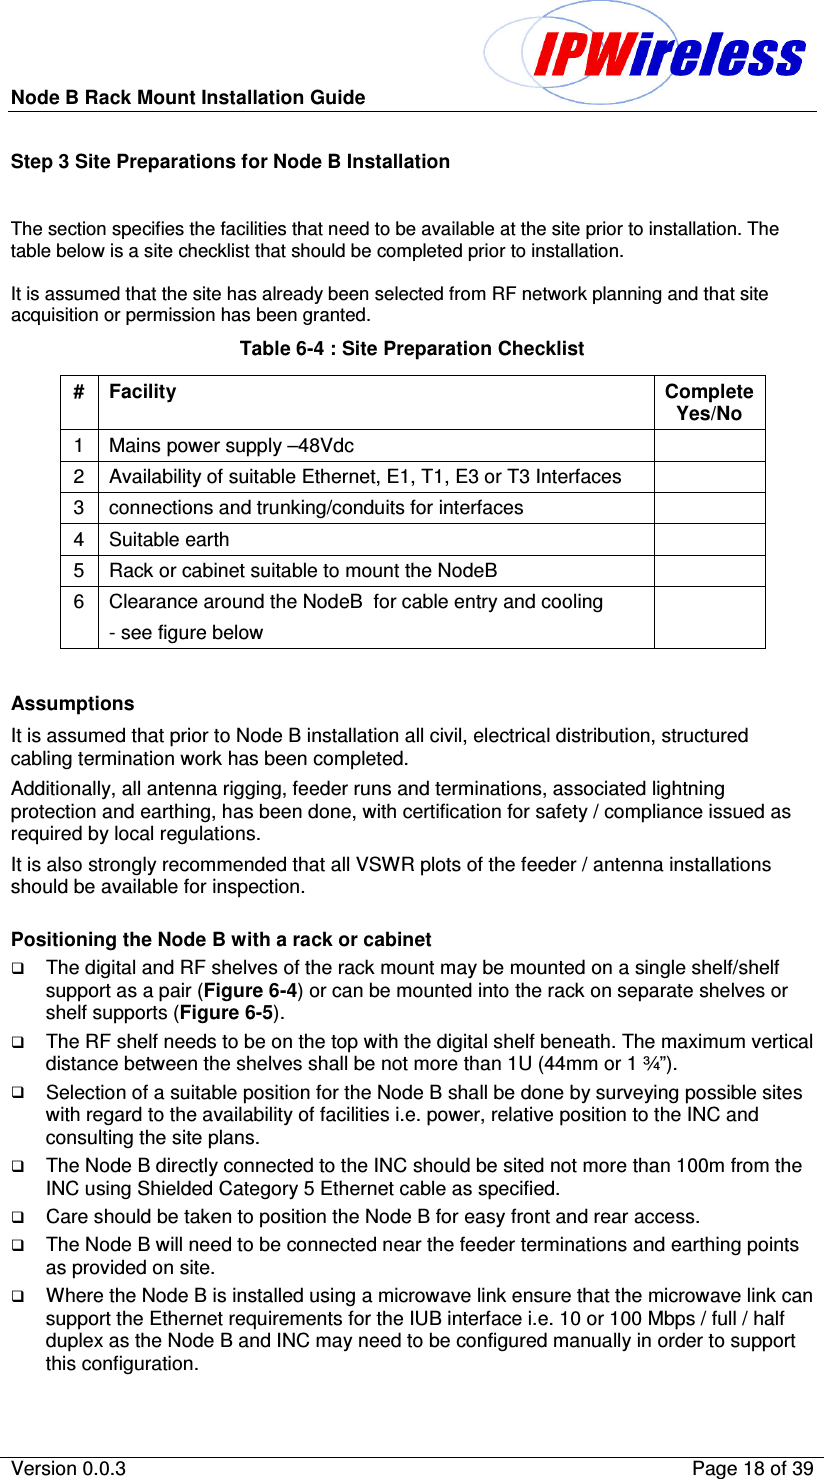 Node B Rack Mount Installation Guide                          Version 0.0.3    Page 18 of 39  Step 3 Site Preparations for Node B Installation  The section specifies the facilities that need to be available at the site prior to installation. The table below is a site checklist that should be completed prior to installation.  It is assumed that the site has already been selected from RF network planning and that site acquisition or permission has been granted. Table 6-4 : Site Preparation Checklist #  Facility  Complete Yes/No 1  Mains power supply –48Vdc   2  Availability of suitable Ethernet, E1, T1, E3 or T3 Interfaces   3  connections and trunking/conduits for interfaces   4  Suitable earth   5  Rack or cabinet suitable to mount the NodeB   6  Clearance around the NodeB  for cable entry and cooling - see figure below    Assumptions It is assumed that prior to Node B installation all civil, electrical distribution, structured cabling termination work has been completed. Additionally, all antenna rigging, feeder runs and terminations, associated lightning protection and earthing, has been done, with certification for safety / compliance issued as required by local regulations.  It is also strongly recommended that all VSWR plots of the feeder / antenna installations should be available for inspection.  Positioning the Node B with a rack or cabinet The digital and RF shelves of the rack mount may be mounted on a single shelf/shelf support as a pair (Figure 6-4) or can be mounted into the rack on separate shelves or shelf supports (Figure 6-5). The RF shelf needs to be on the top with the digital shelf beneath. The maximum vertical distance between the shelves shall be not more than 1U (44mm or 1 ¾”). Selection of a suitable position for the Node B shall be done by surveying possible sites with regard to the availability of facilities i.e. power, relative position to the INC and consulting the site plans. The Node B directly connected to the INC should be sited not more than 100m from the INC using Shielded Category 5 Ethernet cable as specified. Care should be taken to position the Node B for easy front and rear access. The Node B will need to be connected near the feeder terminations and earthing points as provided on site. Where the Node B is installed using a microwave link ensure that the microwave link can support the Ethernet requirements for the IUB interface i.e. 10 or 100 Mbps / full / half duplex as the Node B and INC may need to be configured manually in order to support this configuration. 